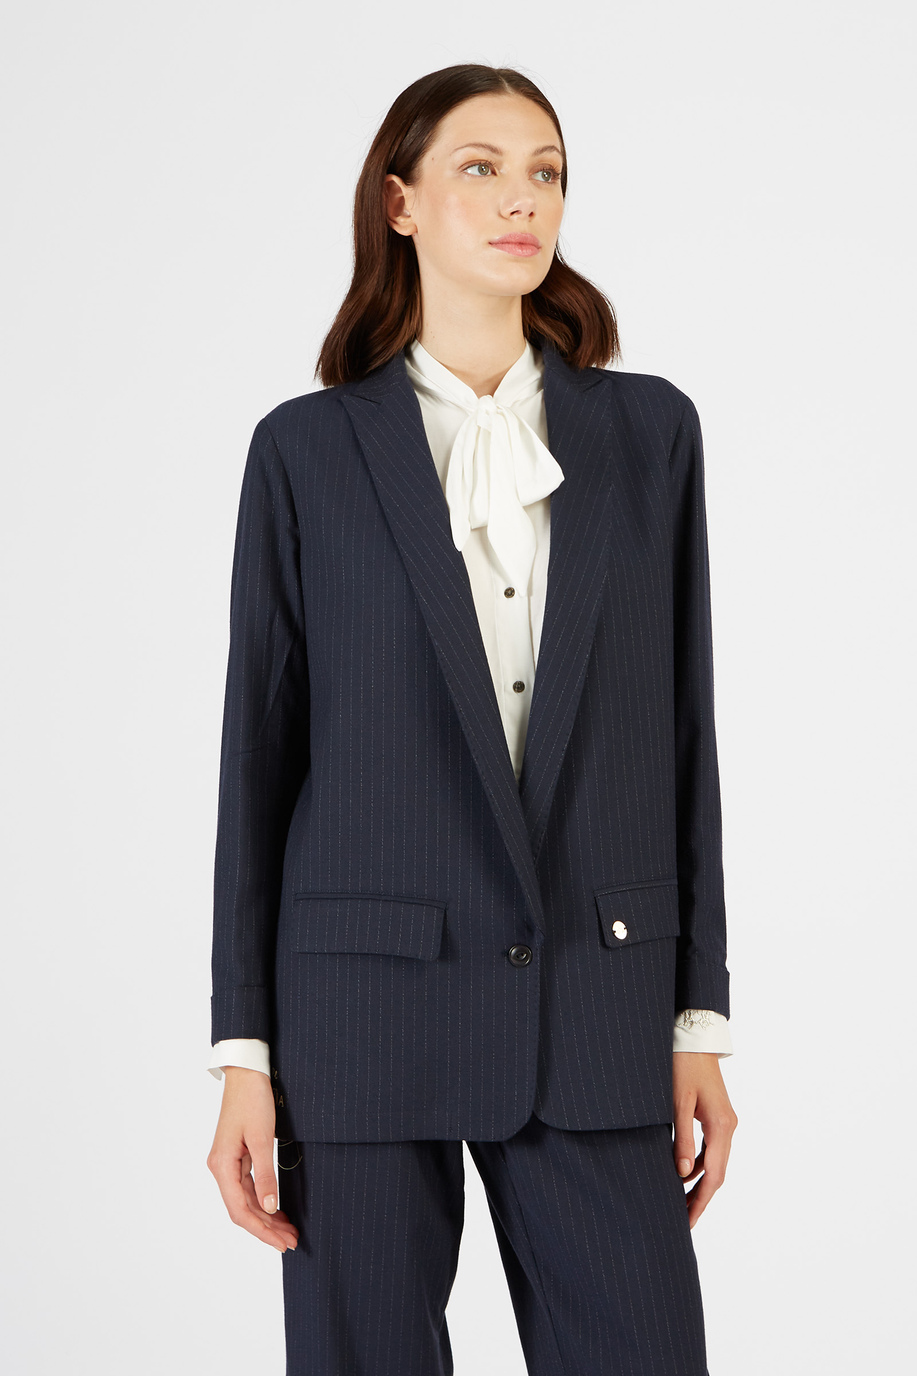 Women’s single-breasted jacquard blazer with regular fit pockets - Outerwear | La Martina - Official Online Shop